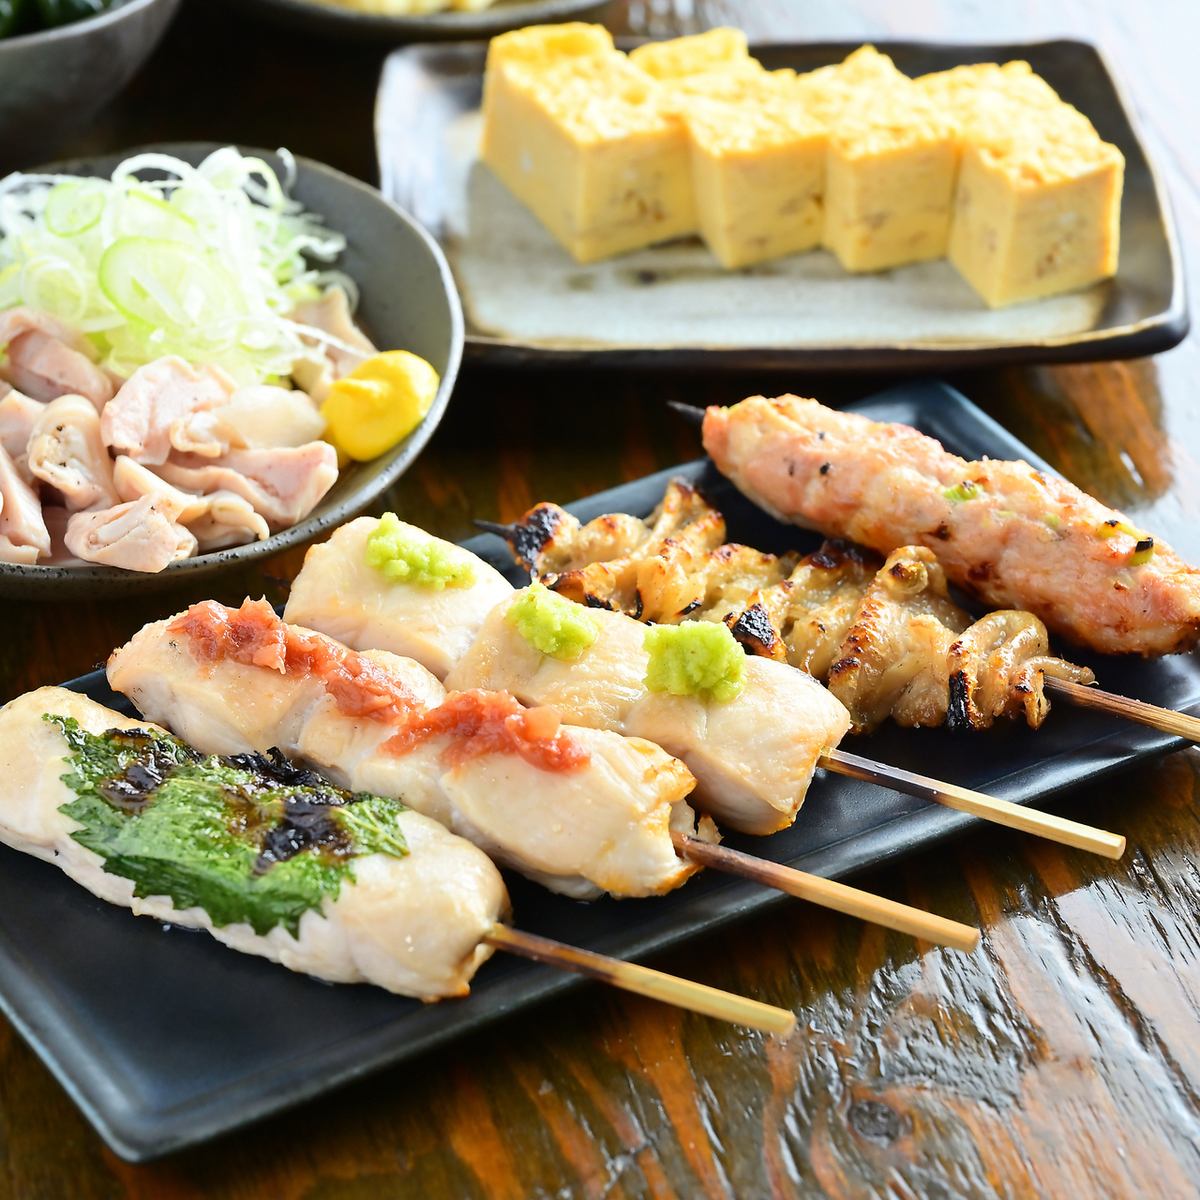 ★Weekdays are a great deal! If you make a reservation by 6:00 pm, we will serve Shumai, our signature menu, for each person★